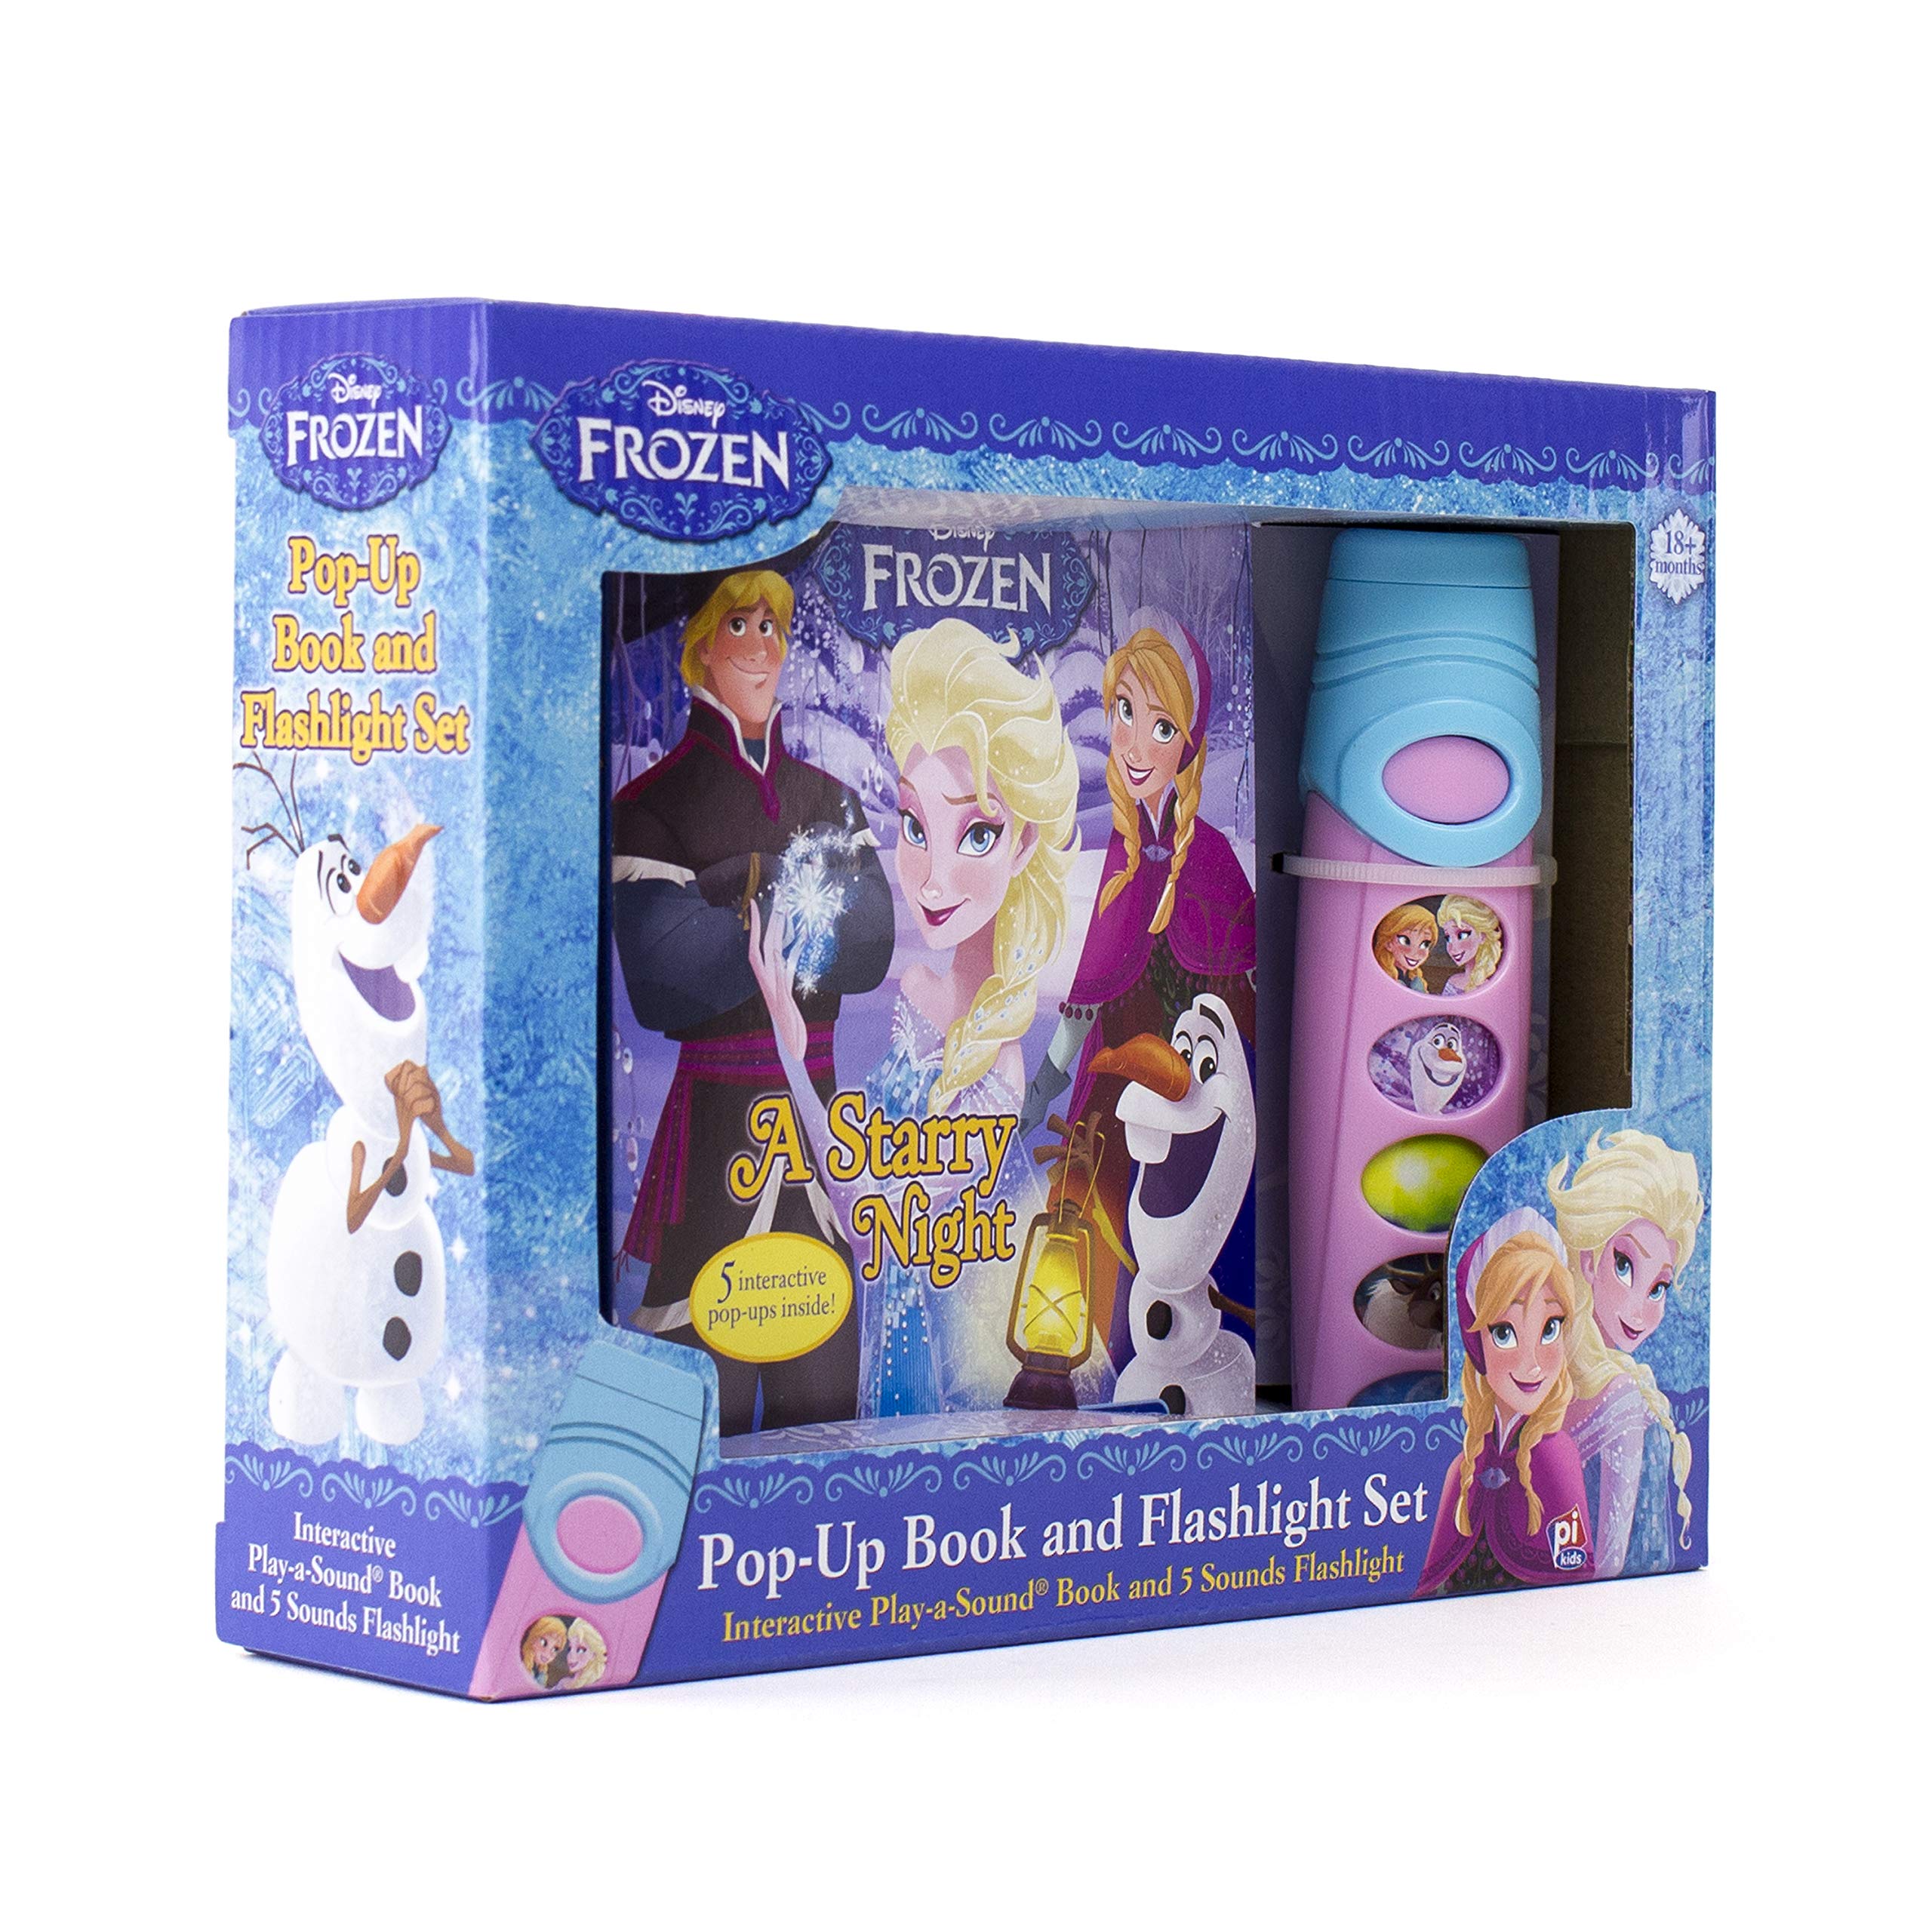 Disney Frozen Elsa, Anna, Olaf, and More! - Pop-up Book and Flashlight Toy Set - PI Kids (Play-A-Sound)